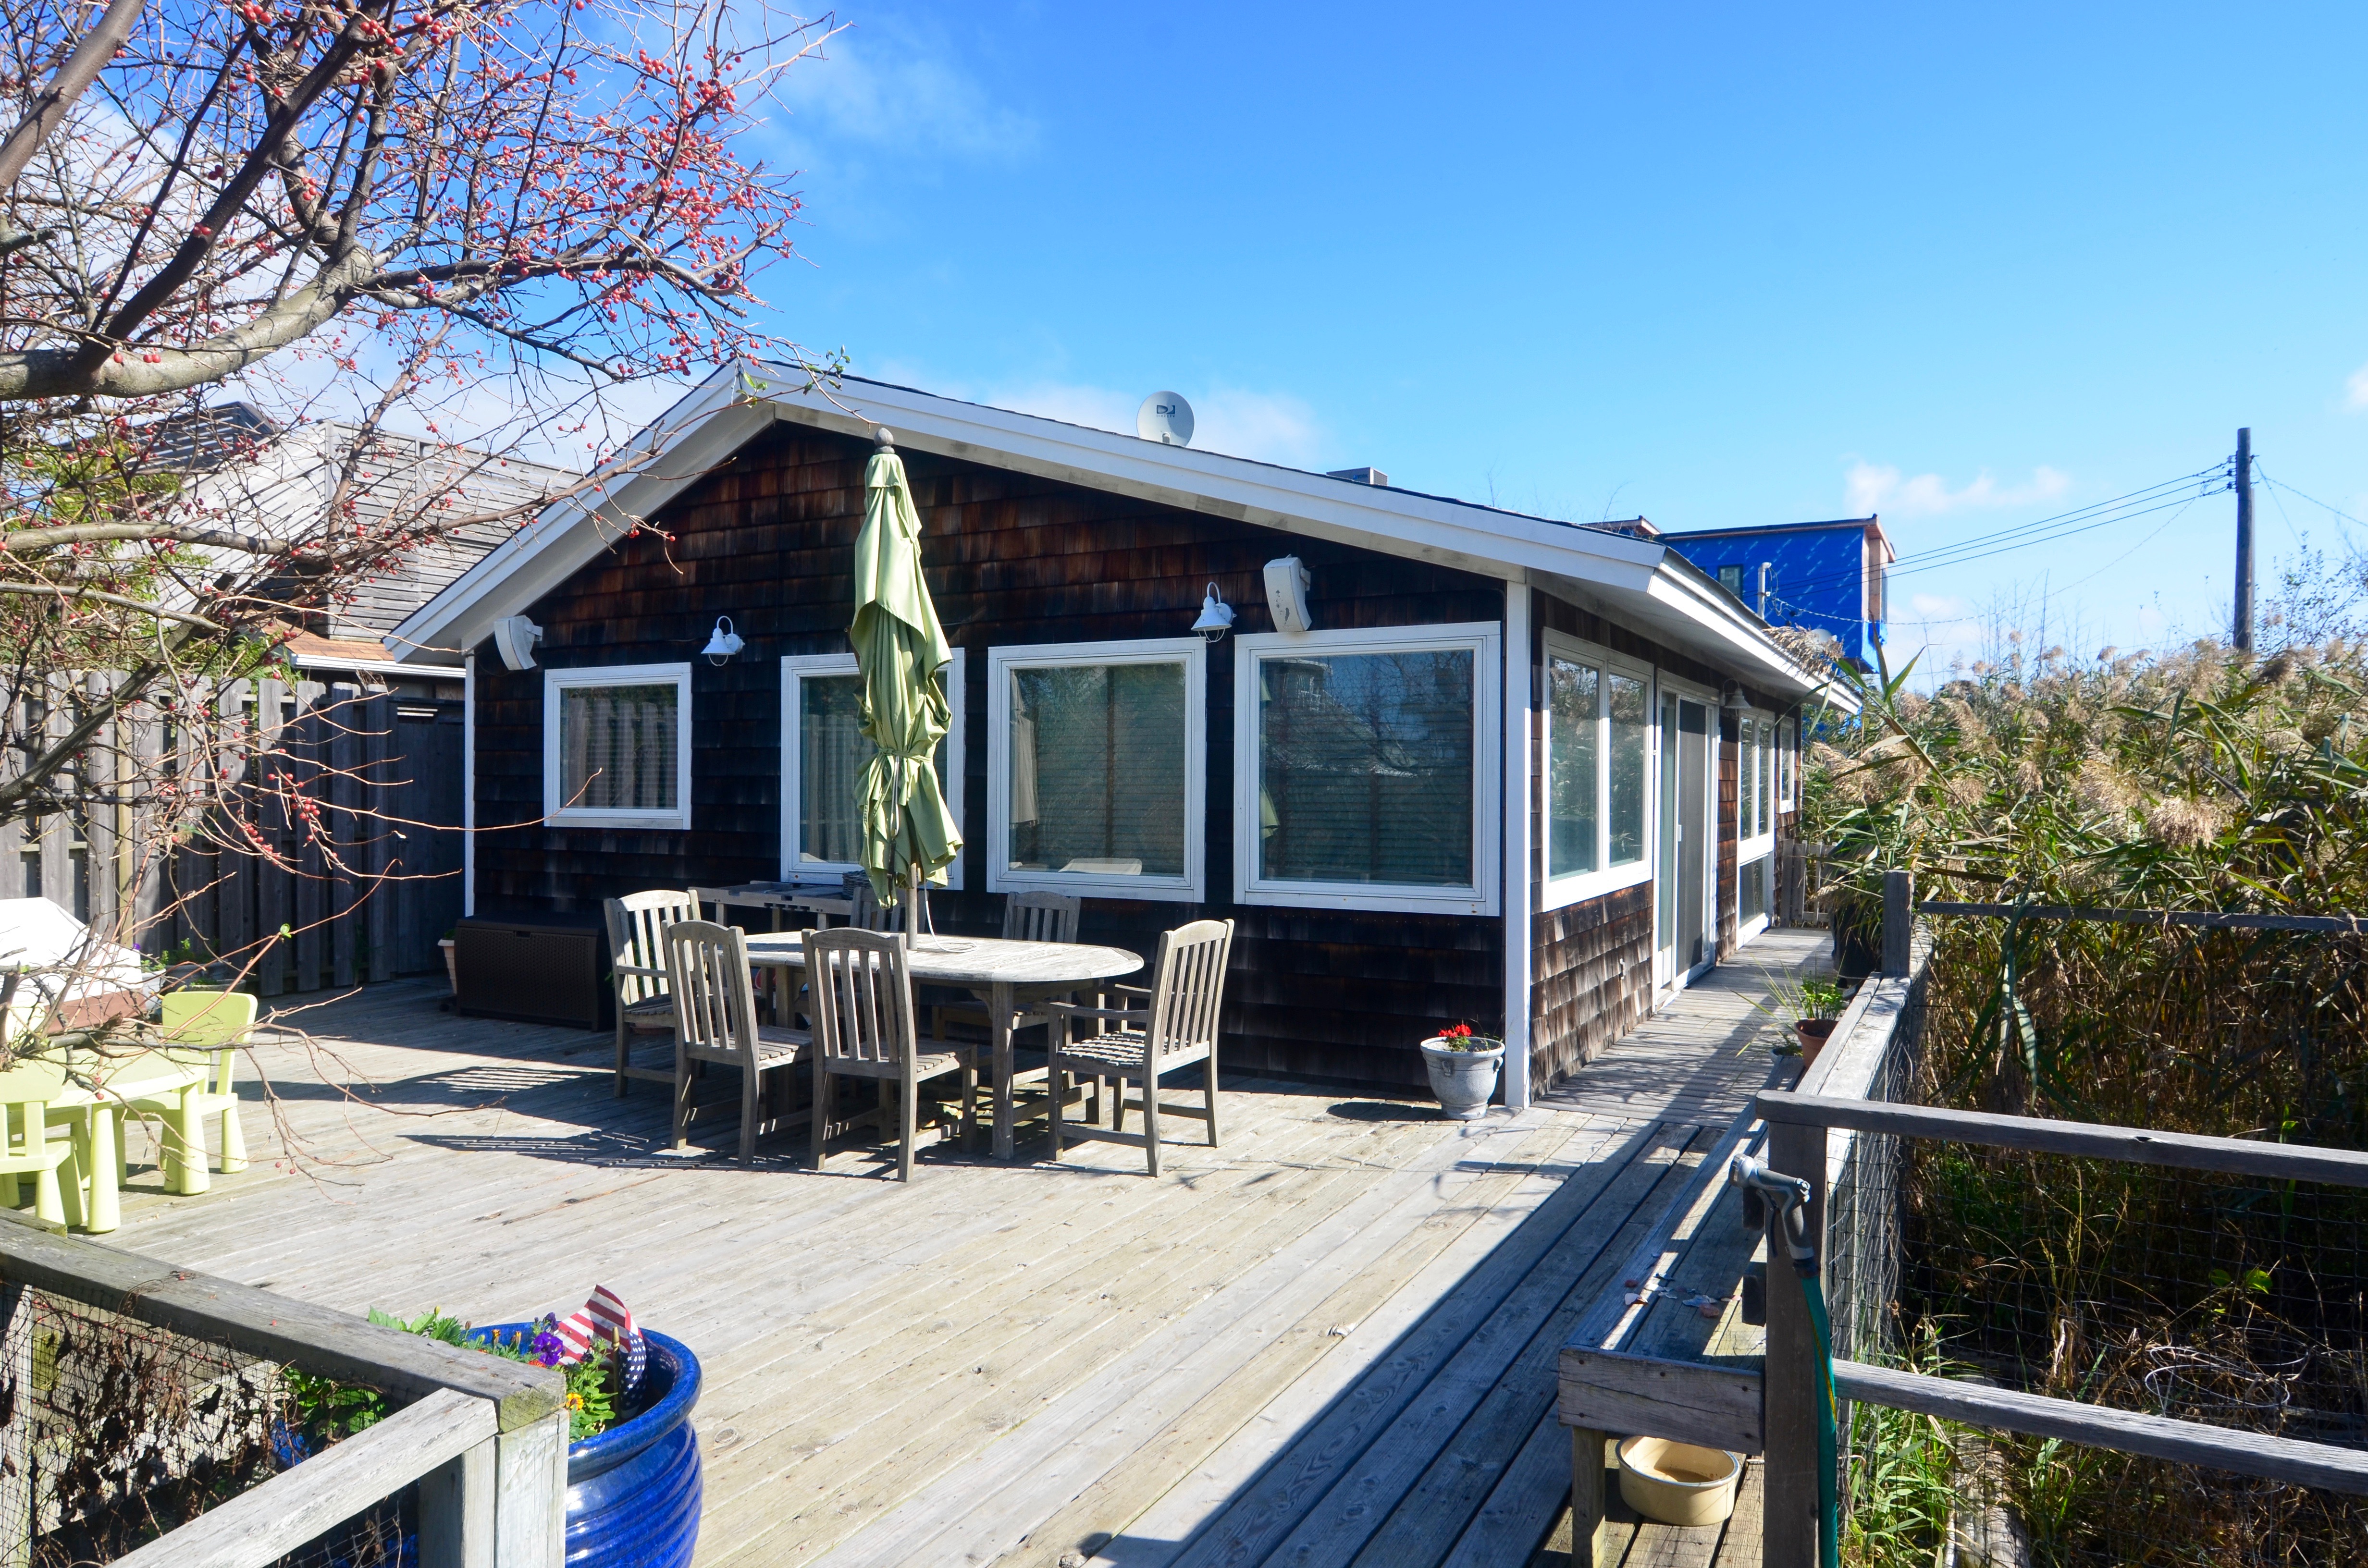 This 3 bedroom, 1.5 bathroom home has it all! Great location near the Seaview border. Sunny west facing deck. Designer kitchen with Miele and Subzero appliances. Open layout great for family gatherings. Both bathrooms are nicely renovated.  Available for monthly or 2 week increments.